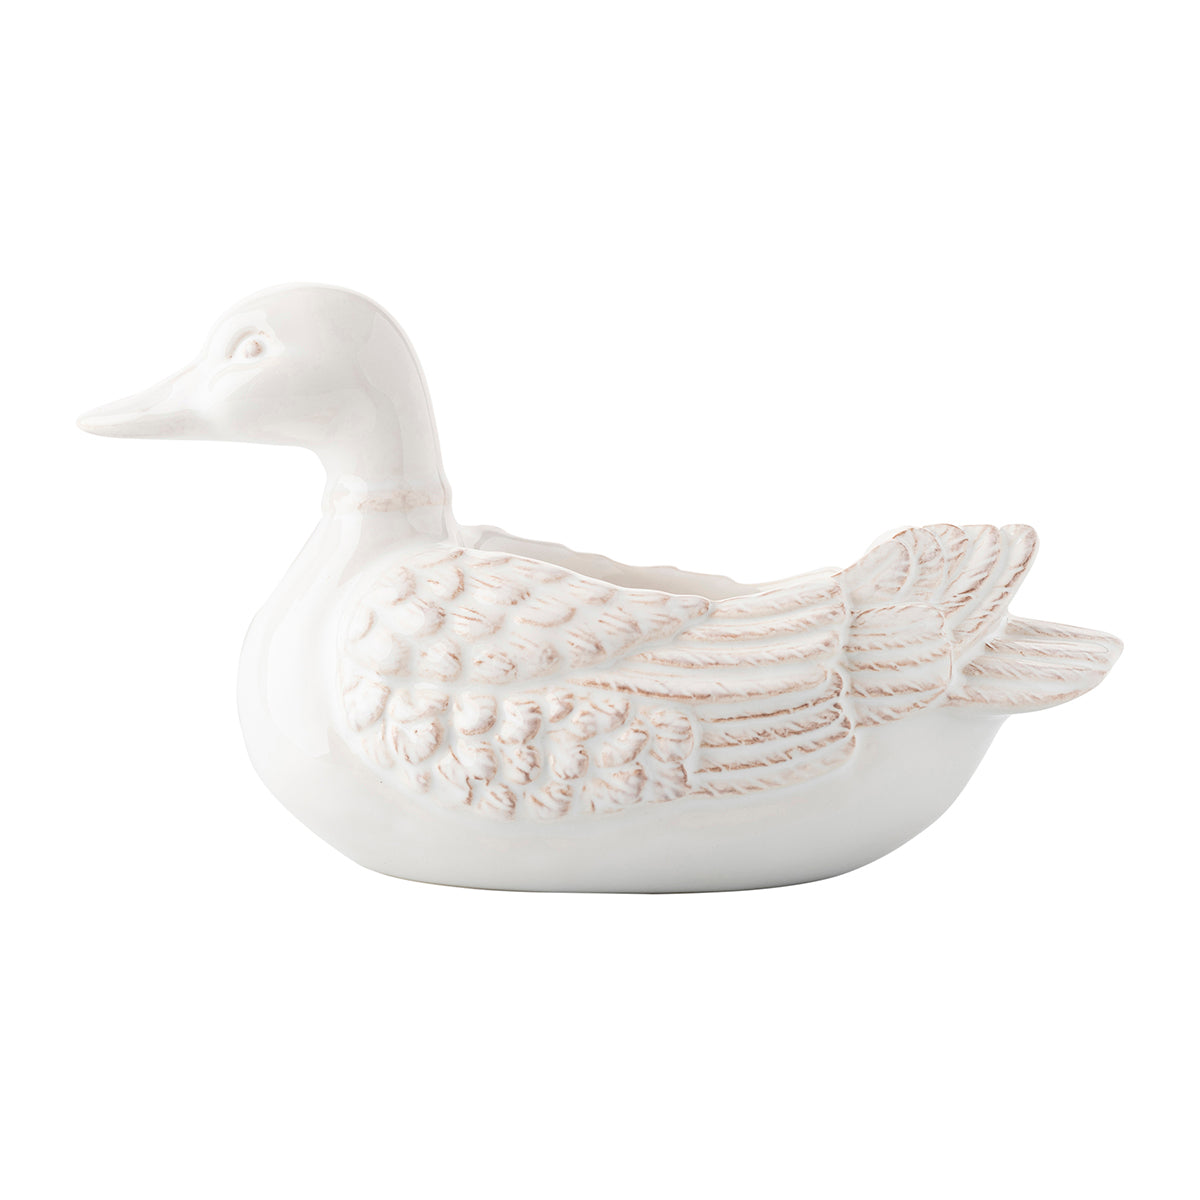 Clever Creatures Duck Bowl - Whitewash-2nd